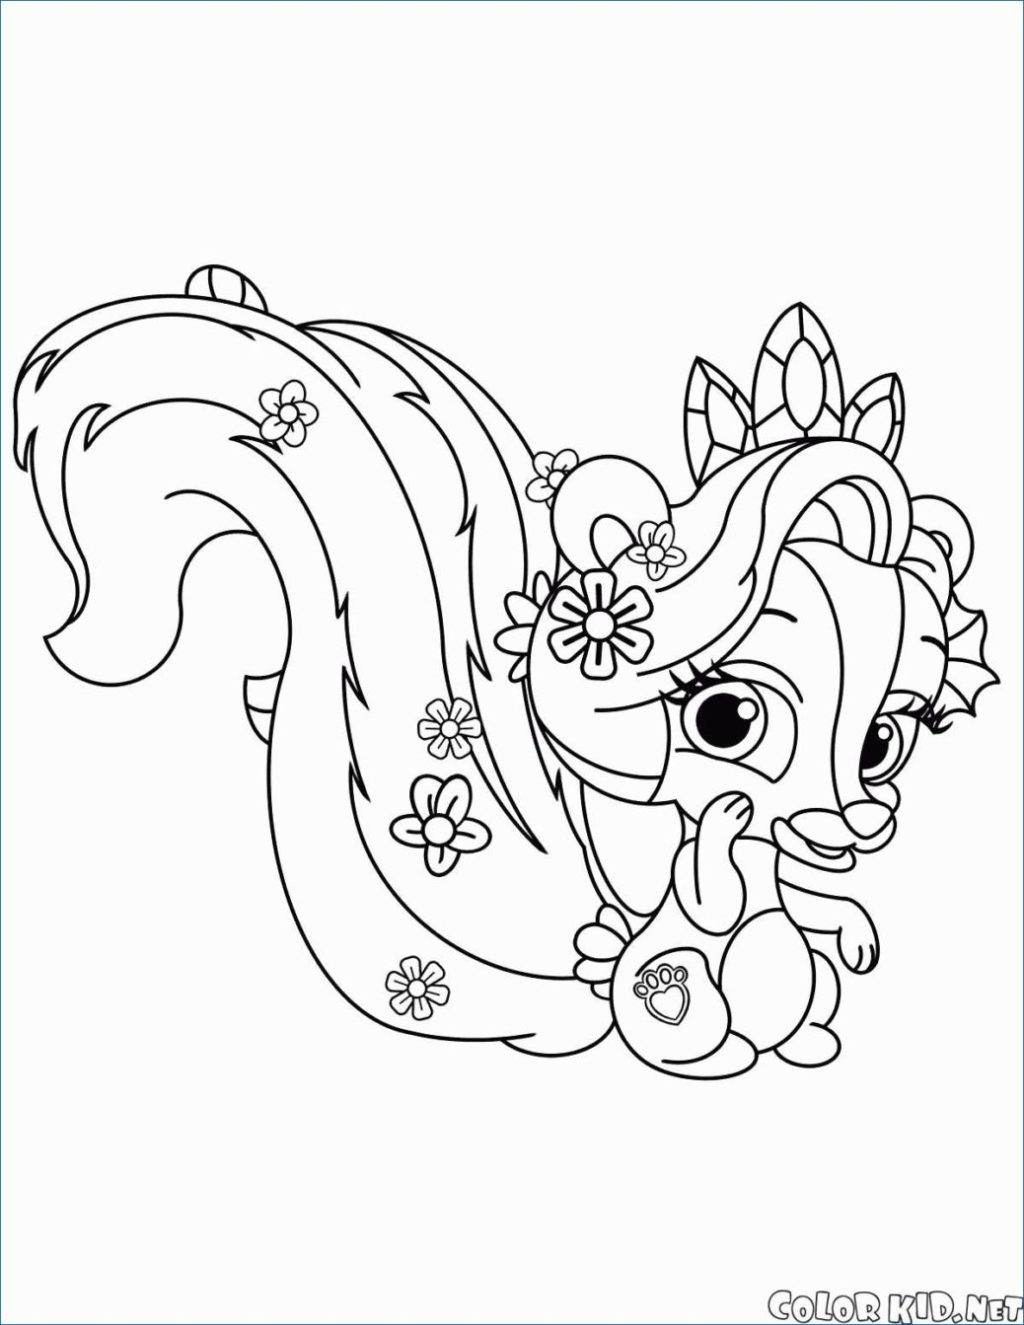 Teacup Coloring Pages To Print Coloring Book World Palace Pets Teacup Coloring Page Free